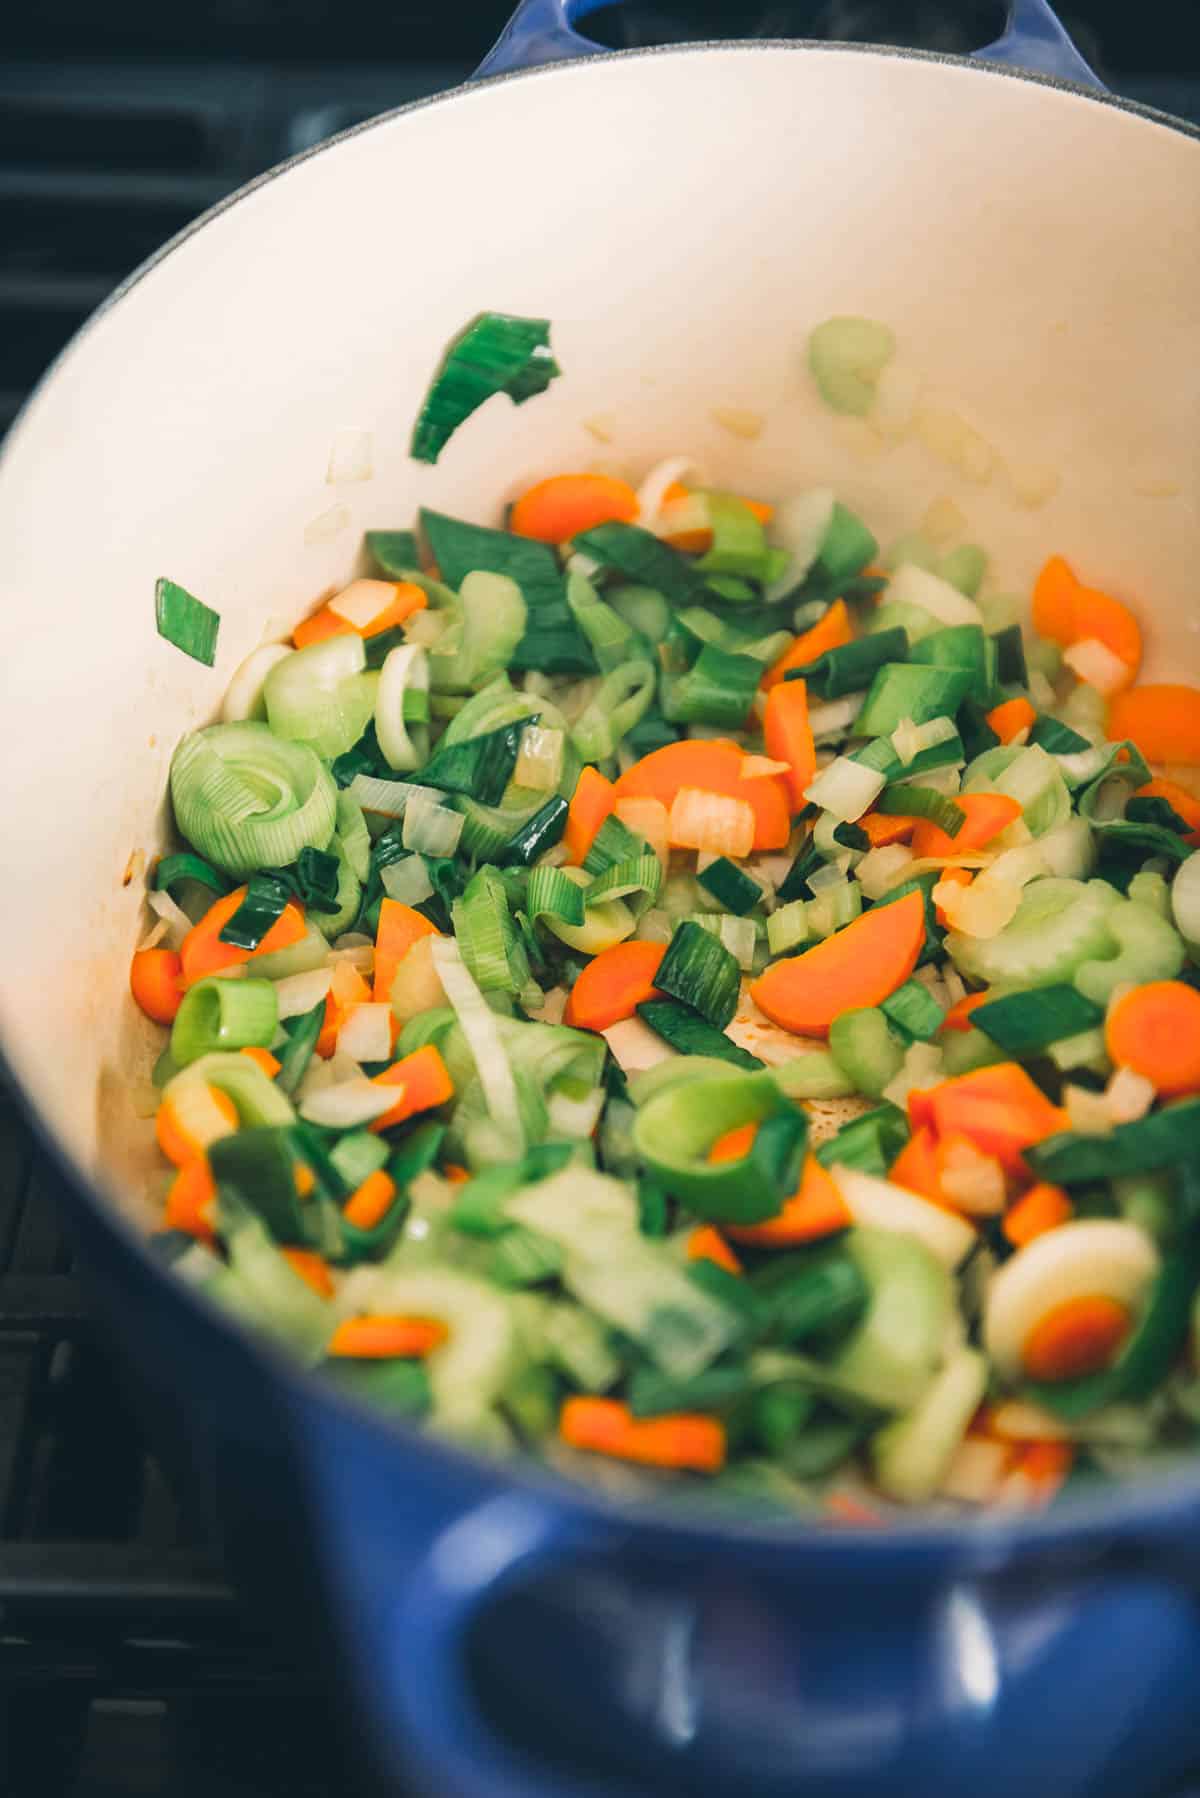 A pot full of vegetables on a stove top.